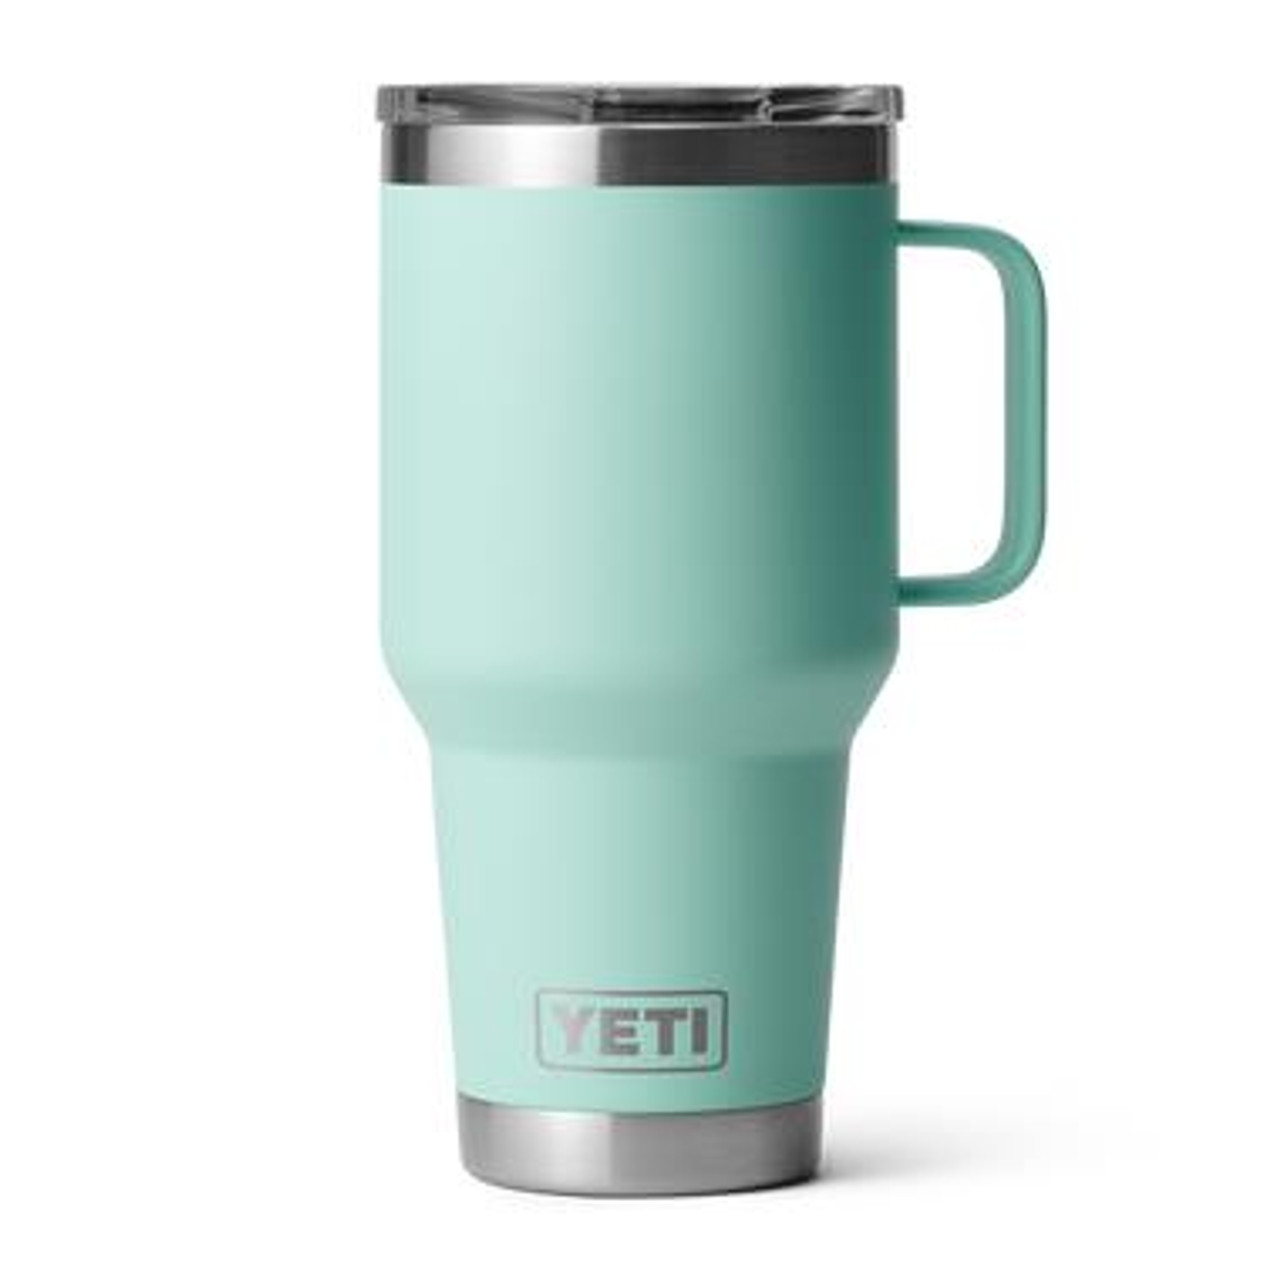 https://cdn11.bigcommerce.com/s-d4f5hm3/images/stencil/1280x1280/products/65664/155440/Yeti-Rambler-Travel-Mug-with-Stronghold-Lid-30oz-888830130759_image2__96984.1692110738.jpg?c=2